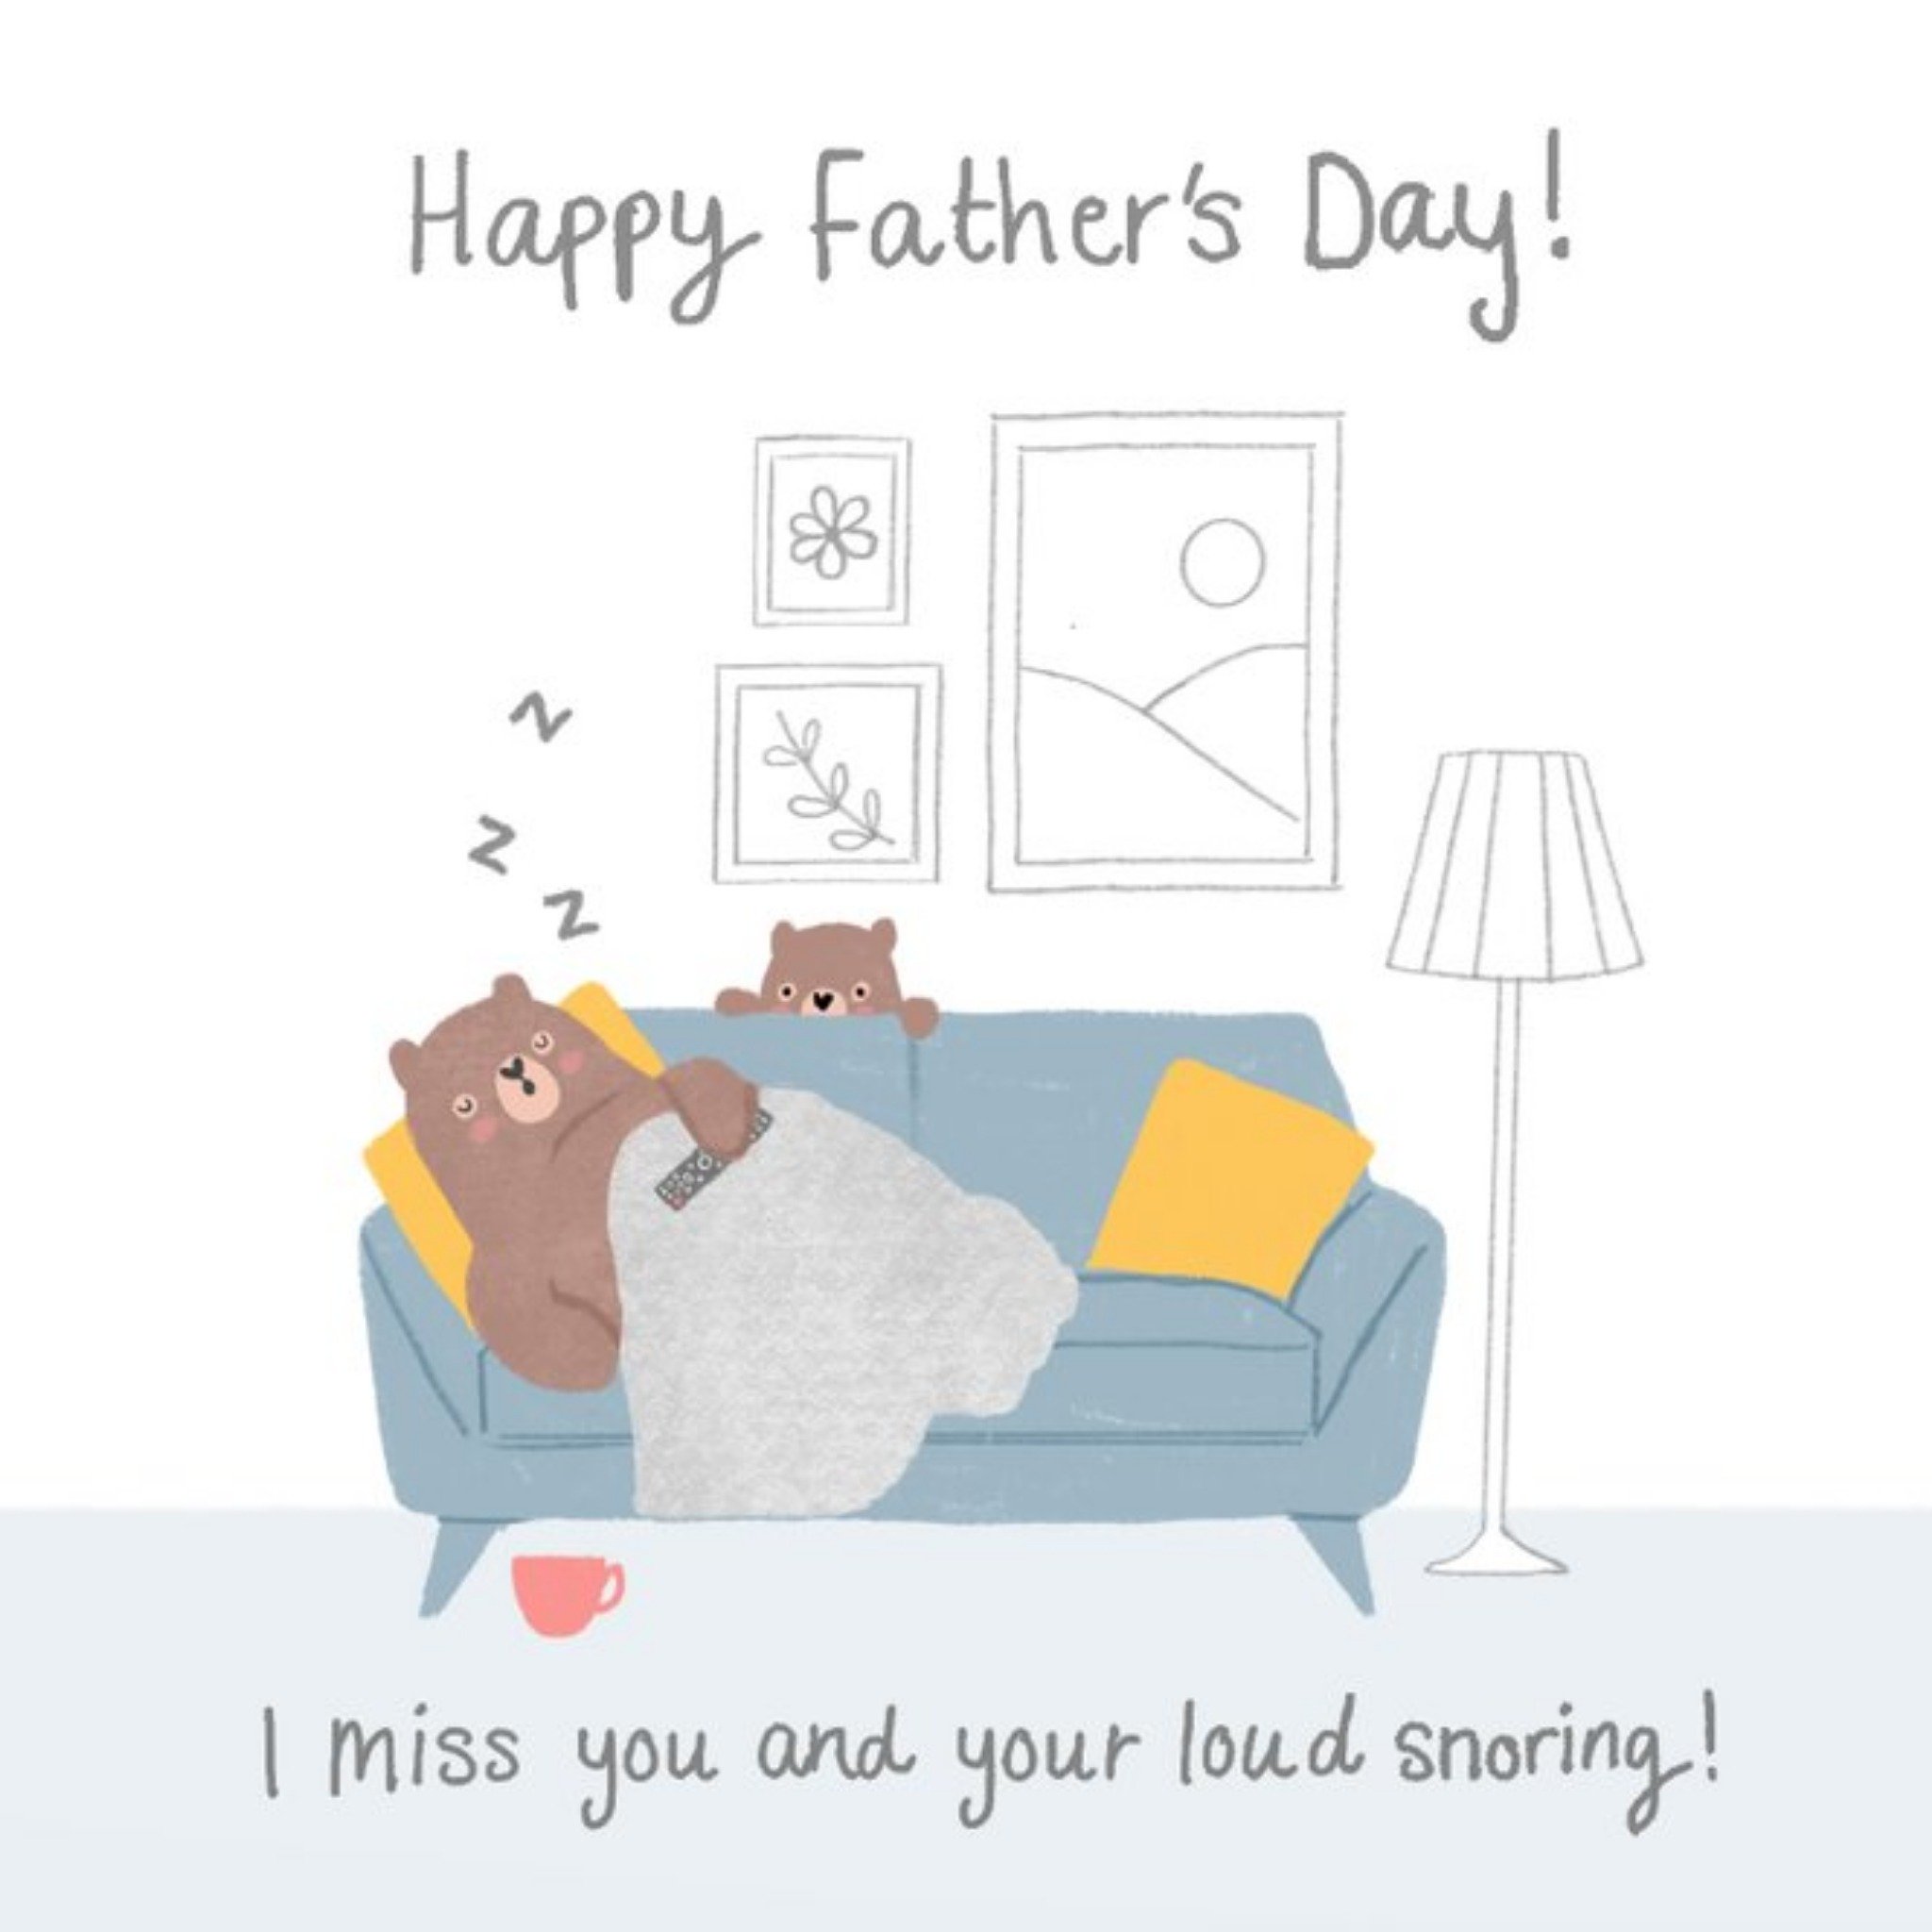 Moonpig Sleeping Bear Happy Father's Day I Miss You And Your Loud Snoring Card, Square